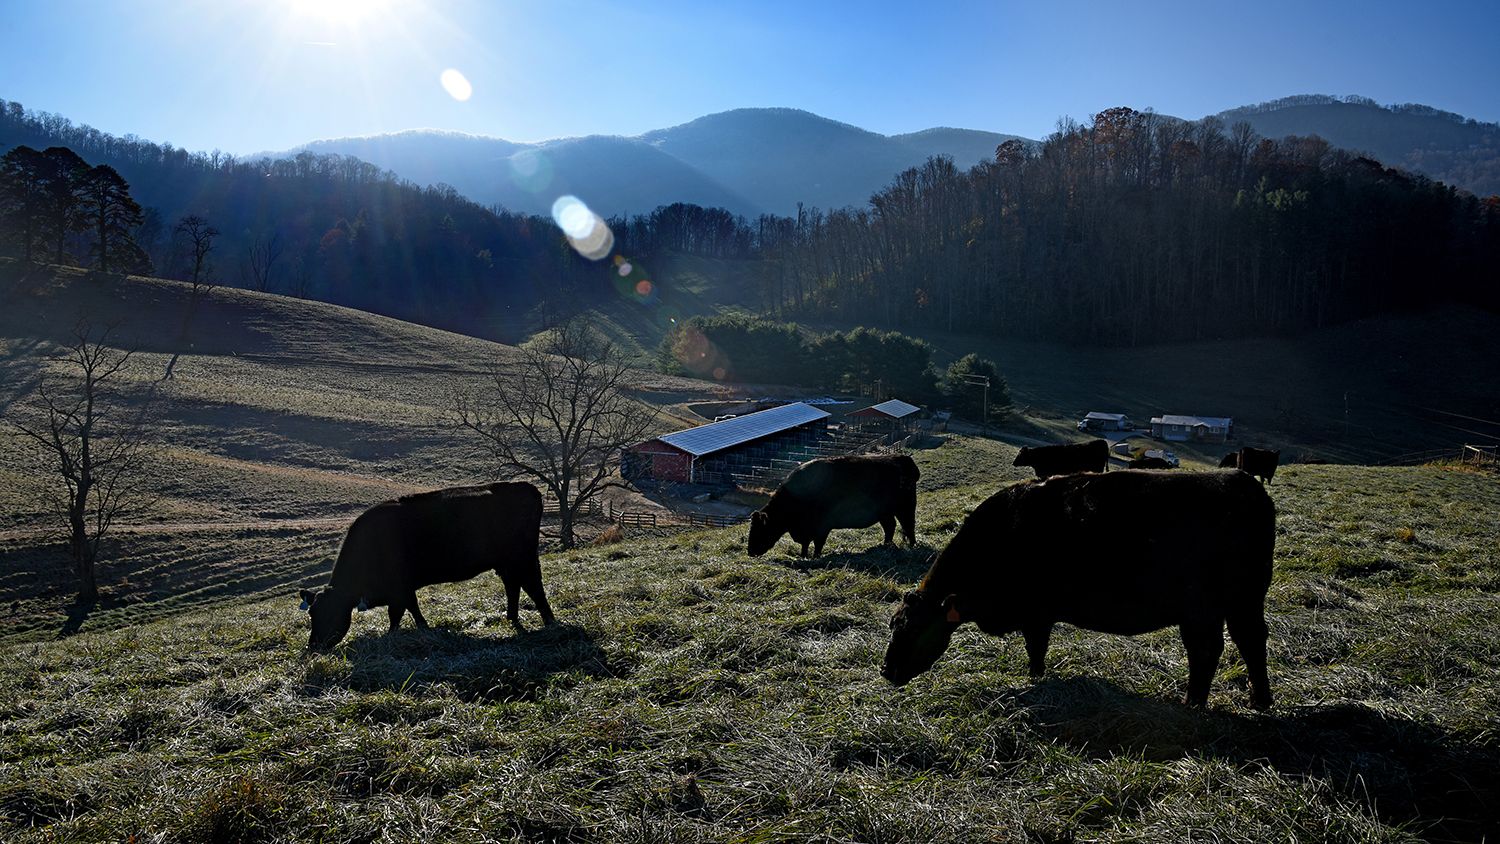 Three cows grazing, with mountains in the background